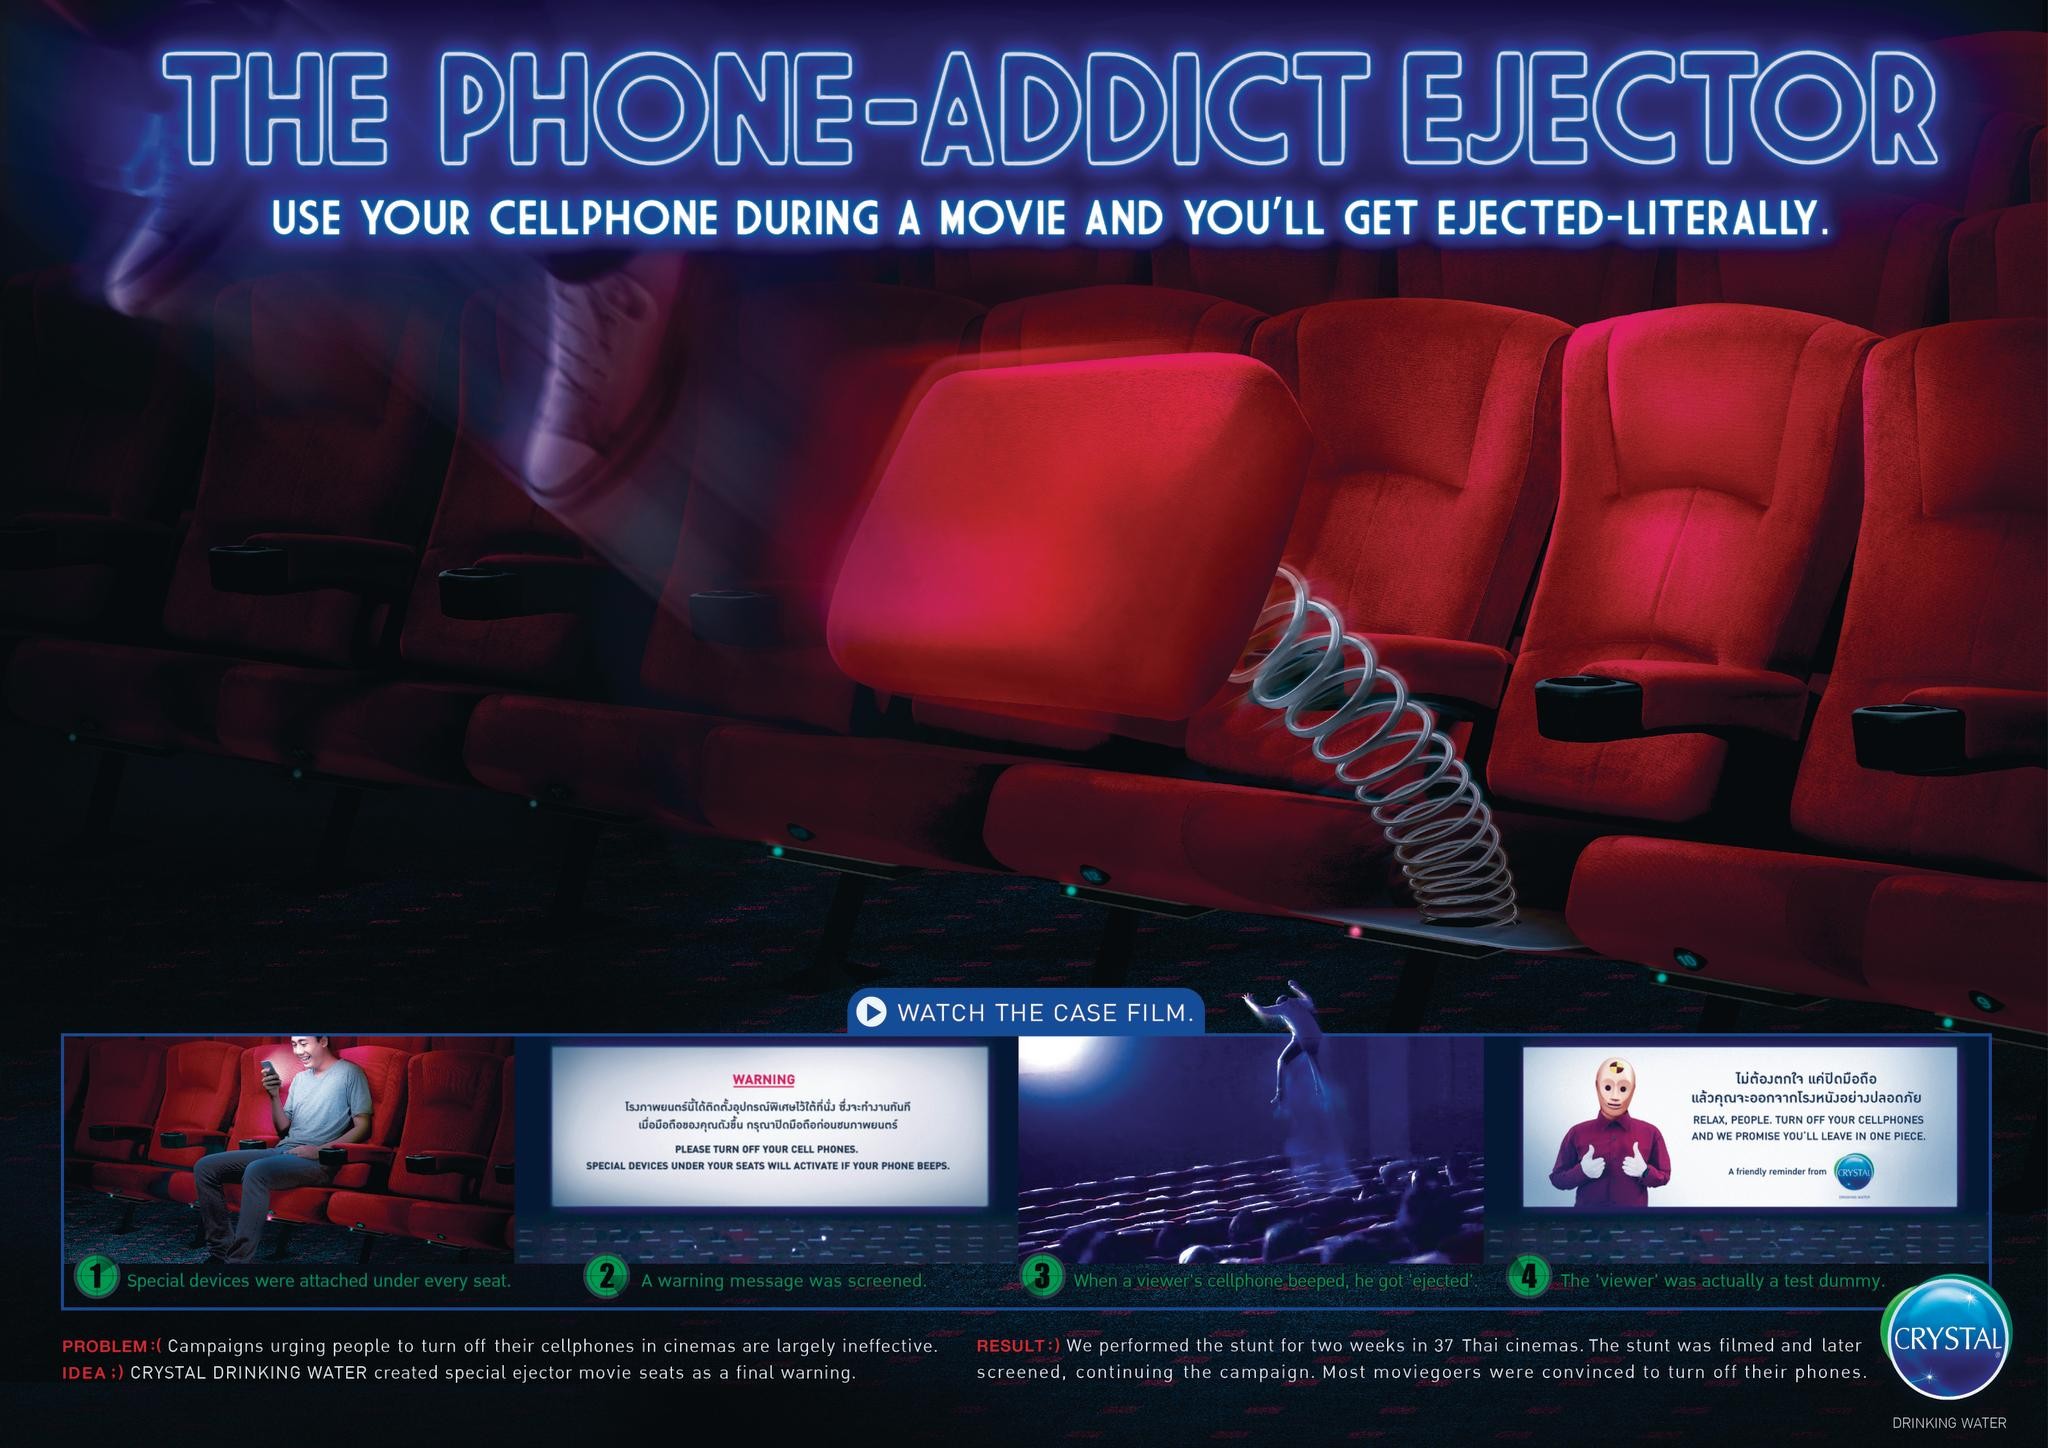 THE PHONE-ADDICT EJECTOR